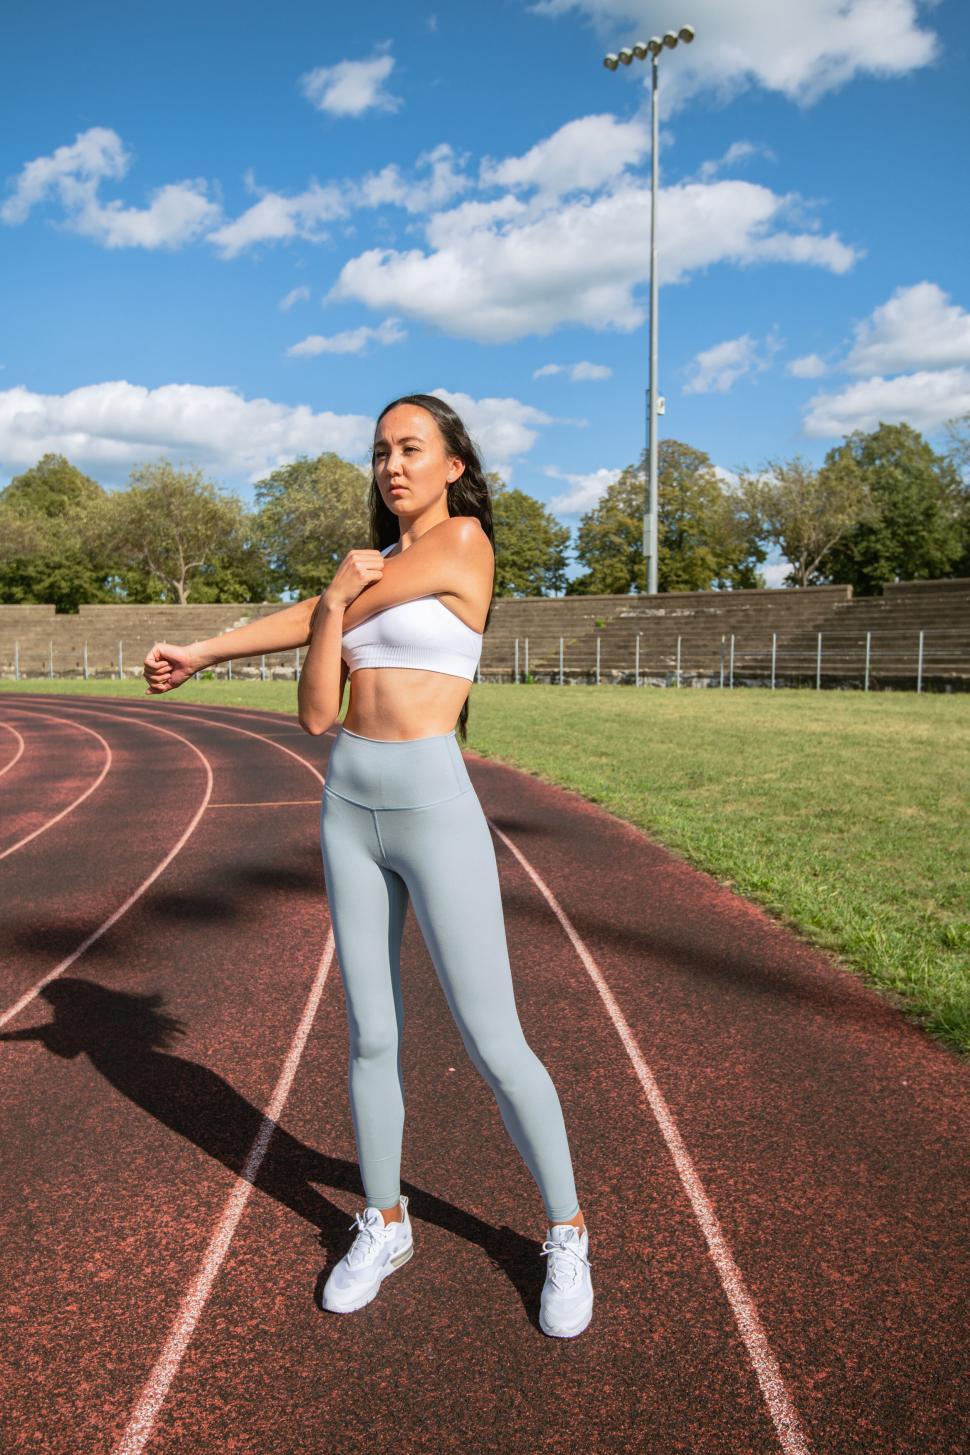 Free Image of Athletic woman stretching on a track field 